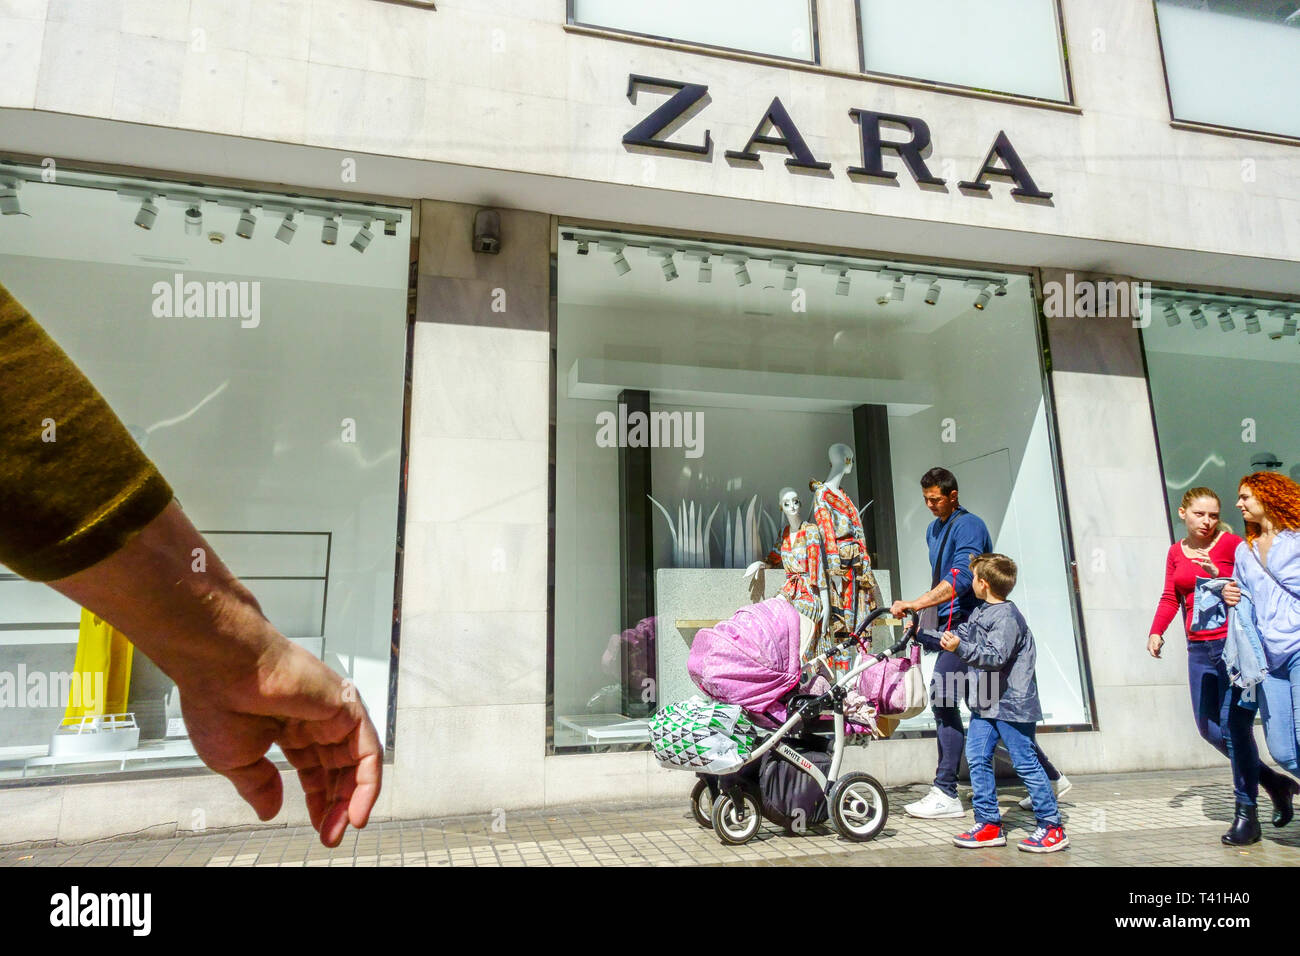 Spain zara store hi-res stock photography and images - Alamy